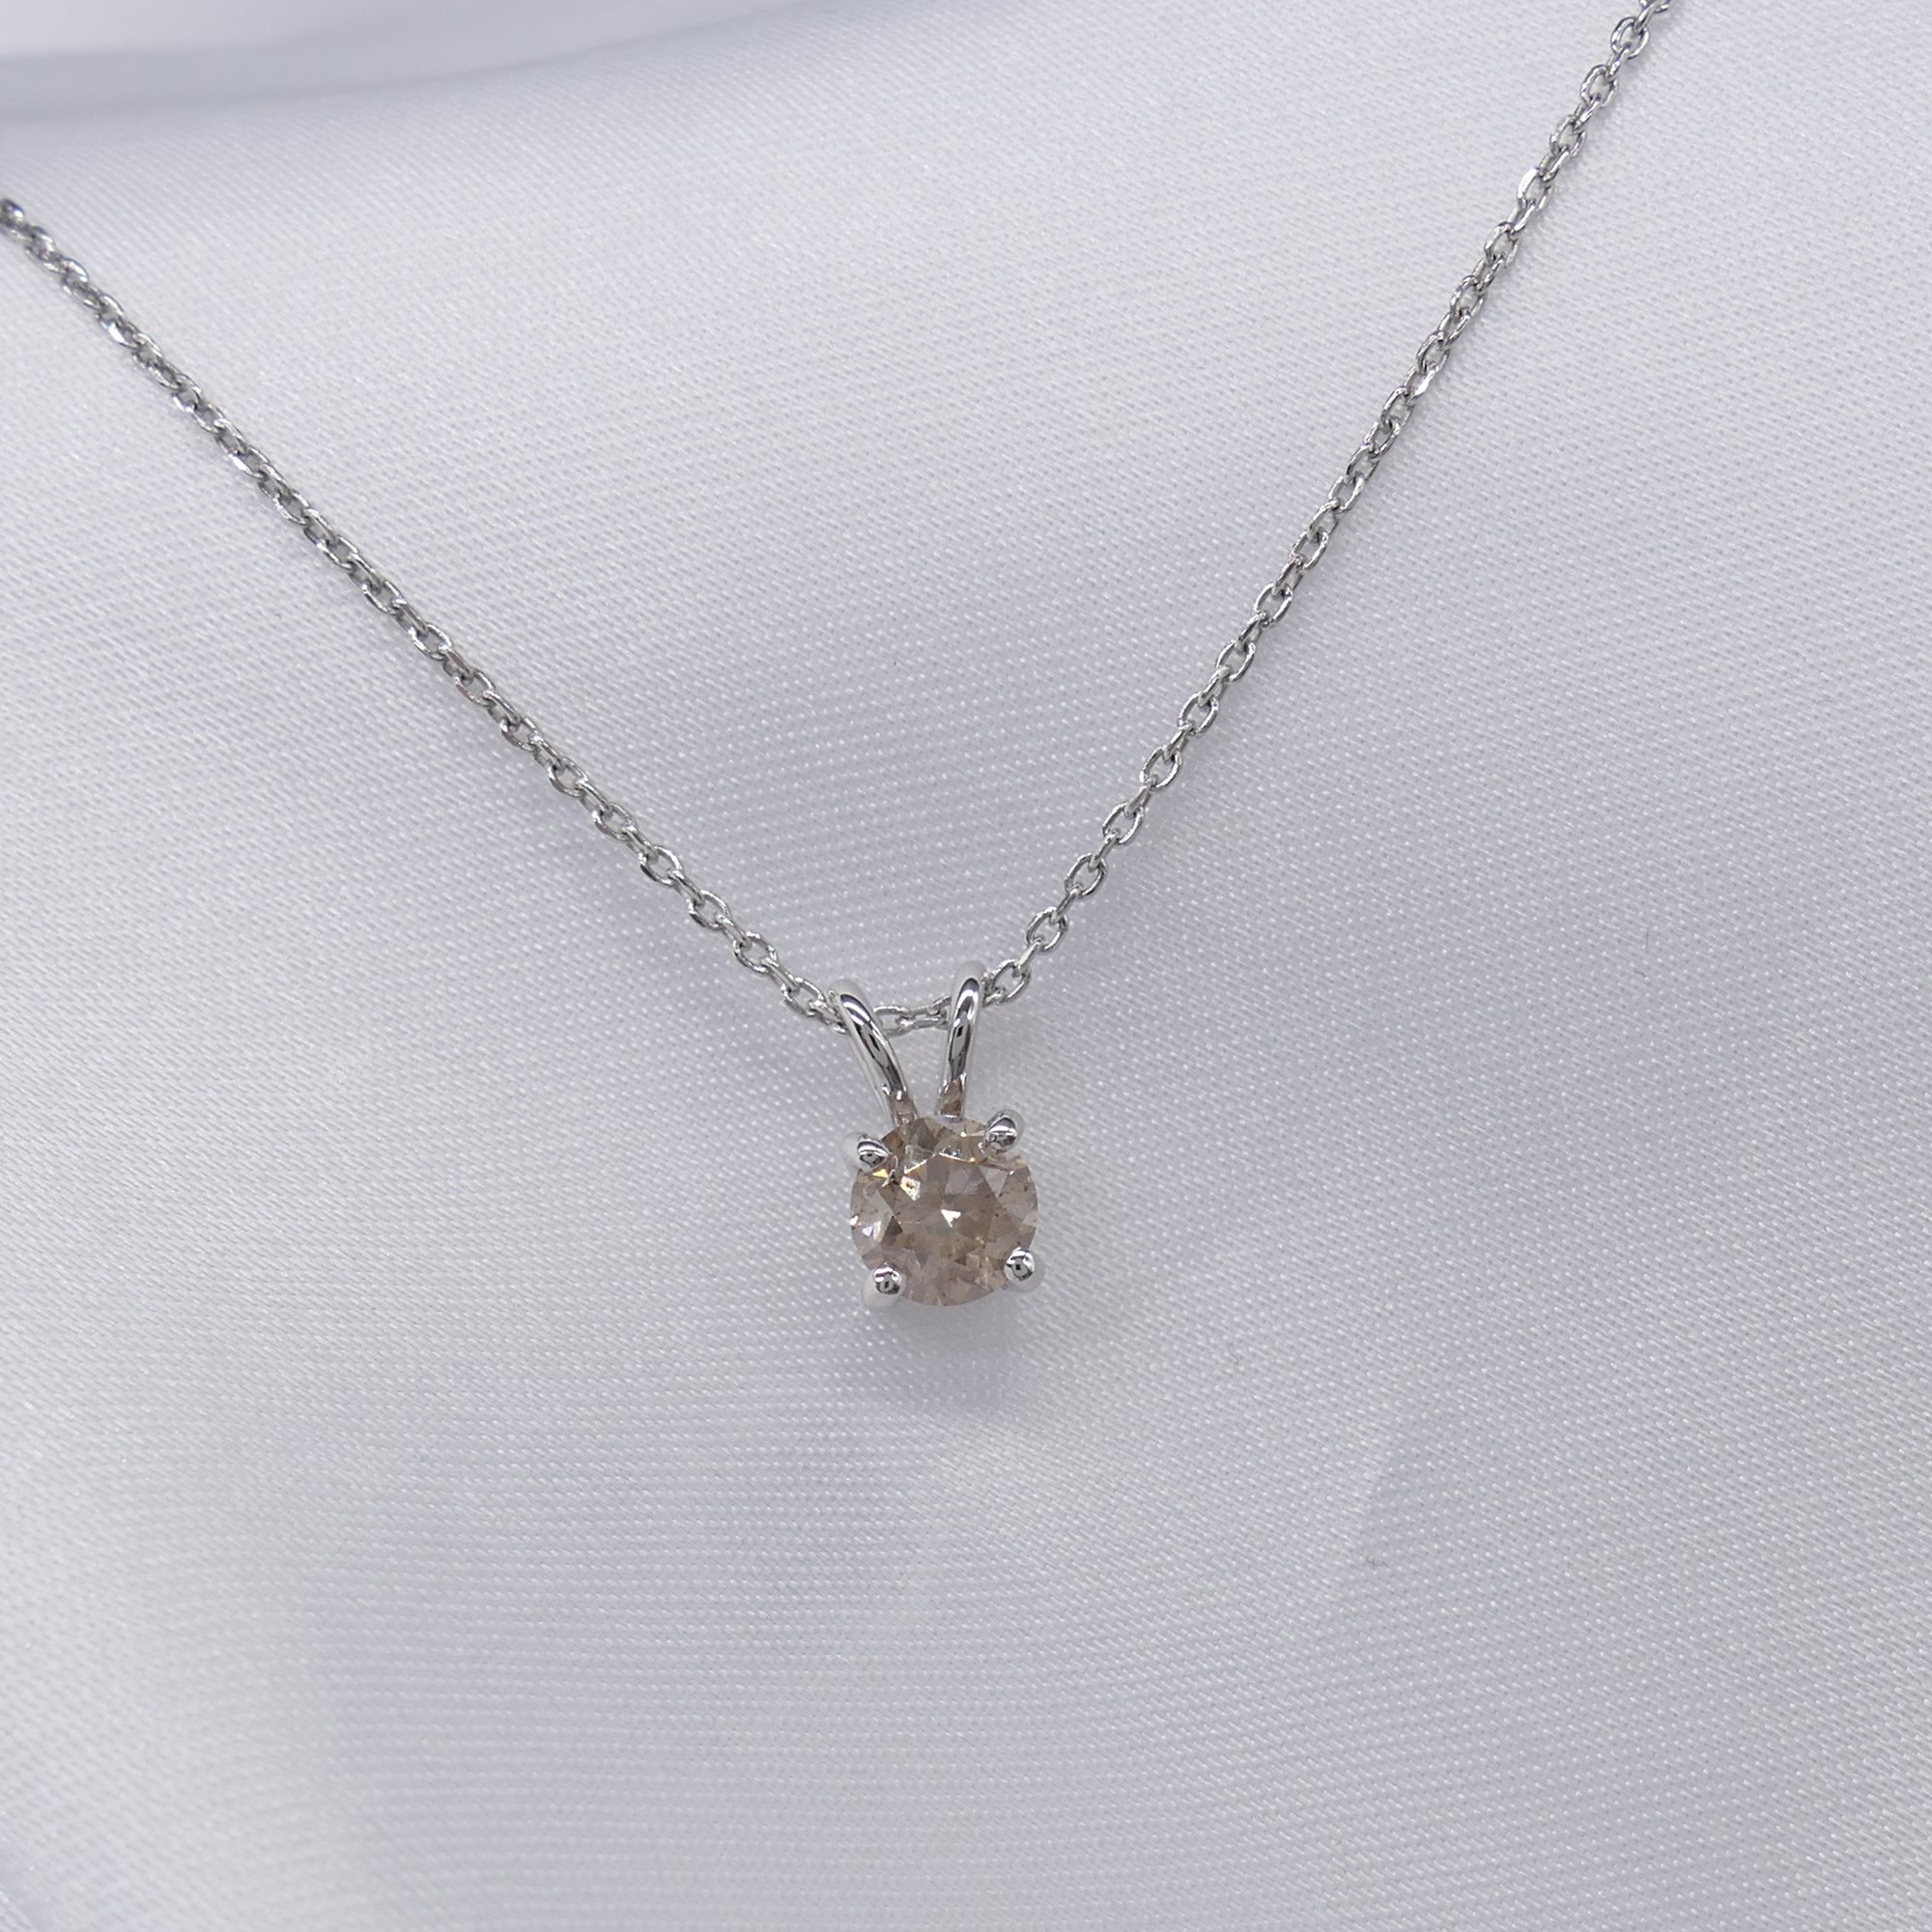 18ct white gold 0.74 carat diamond solitaire pendant with chain, boxed. - Image 3 of 7